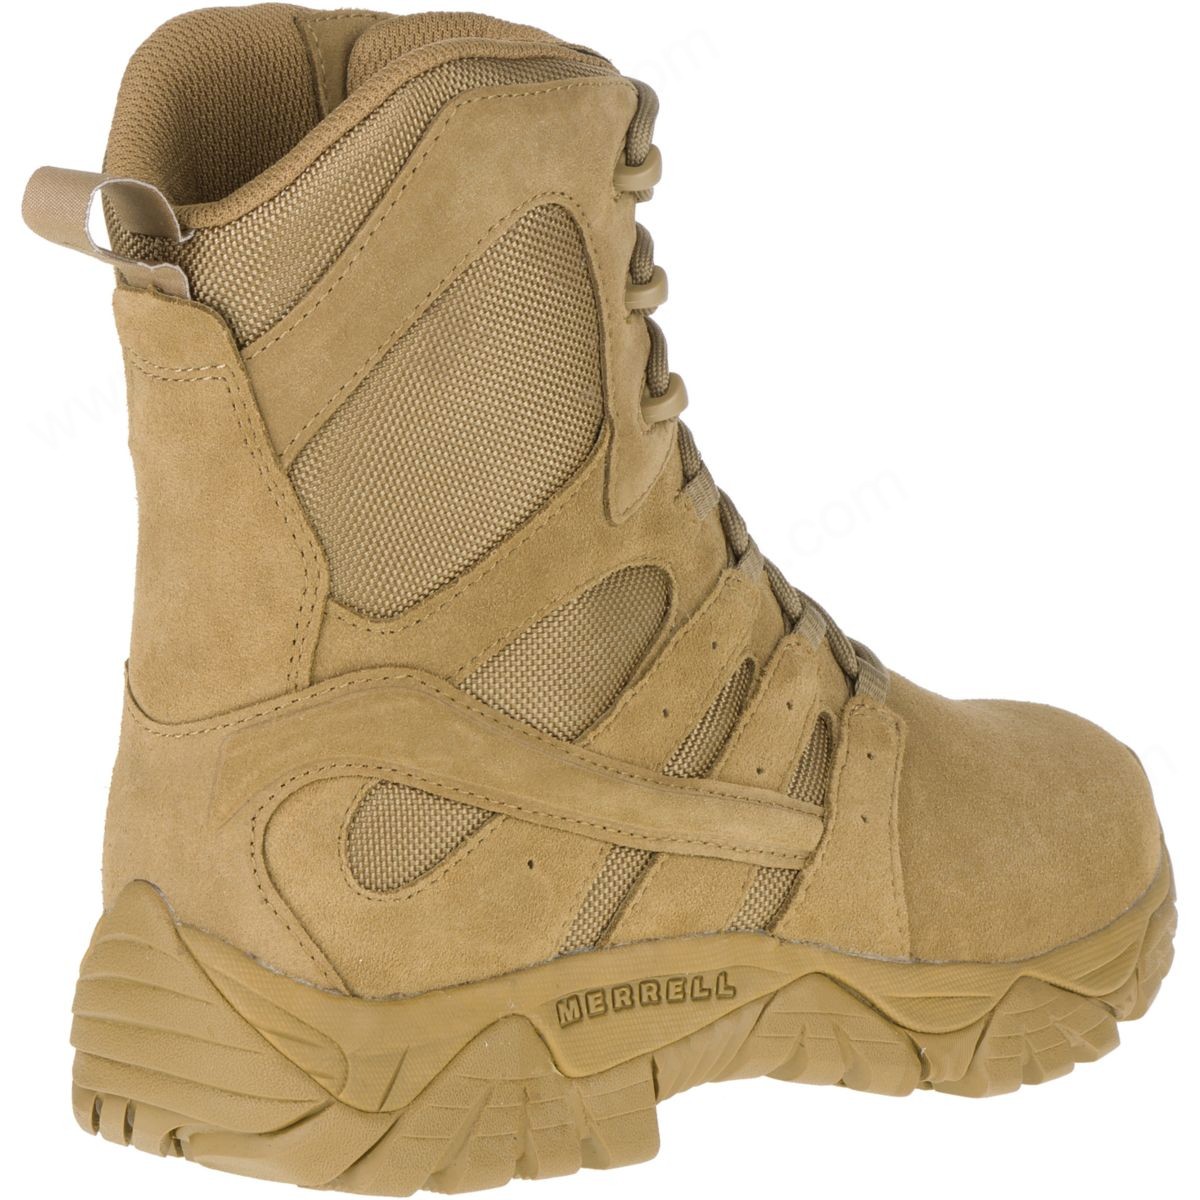 Merrell Lady's Moab " Tactical Defense Boot Coyote - -7